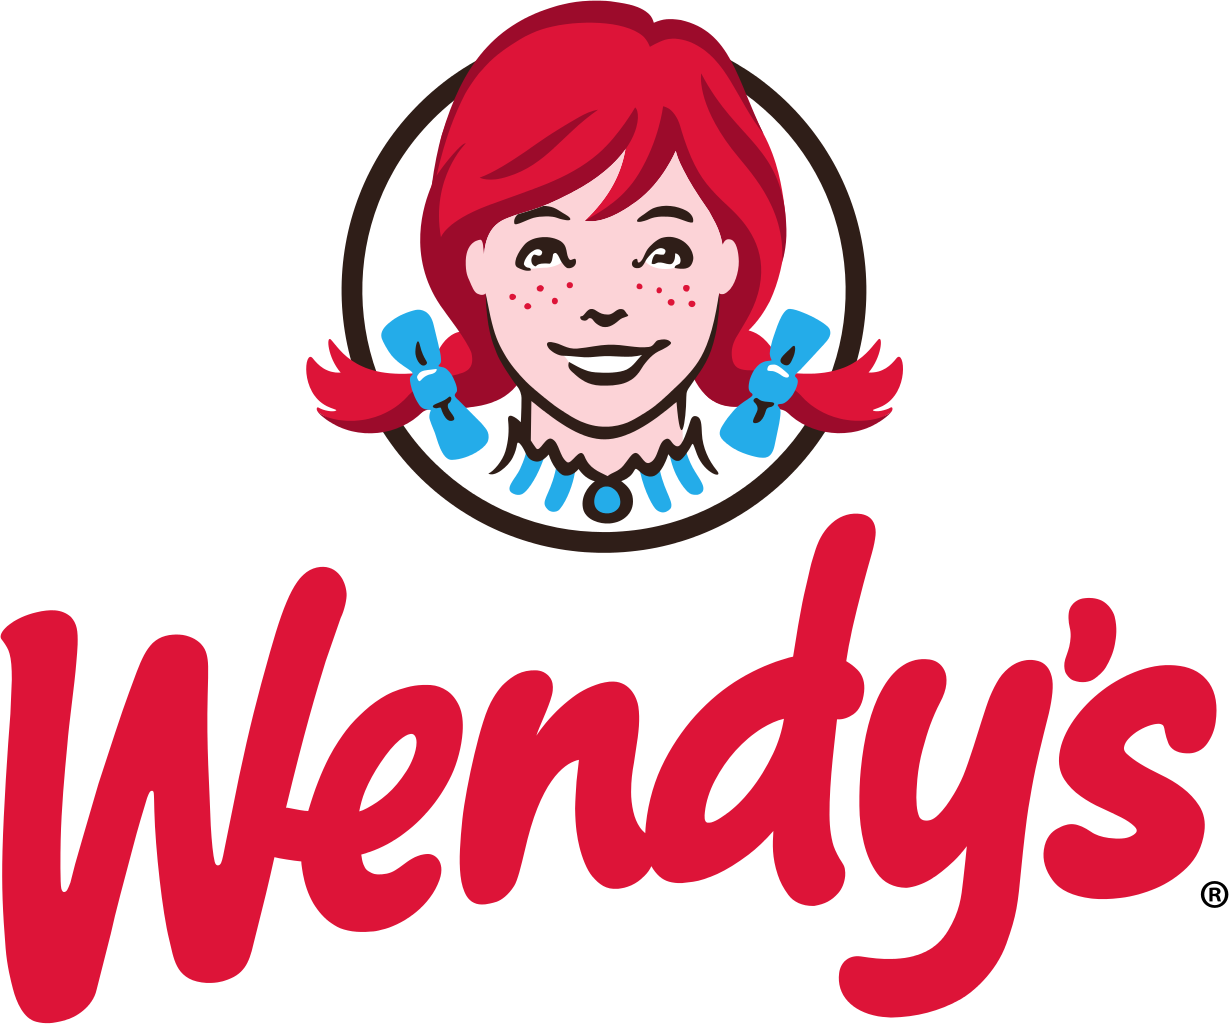 1229px-Wendy's_logo_2012.svg.png